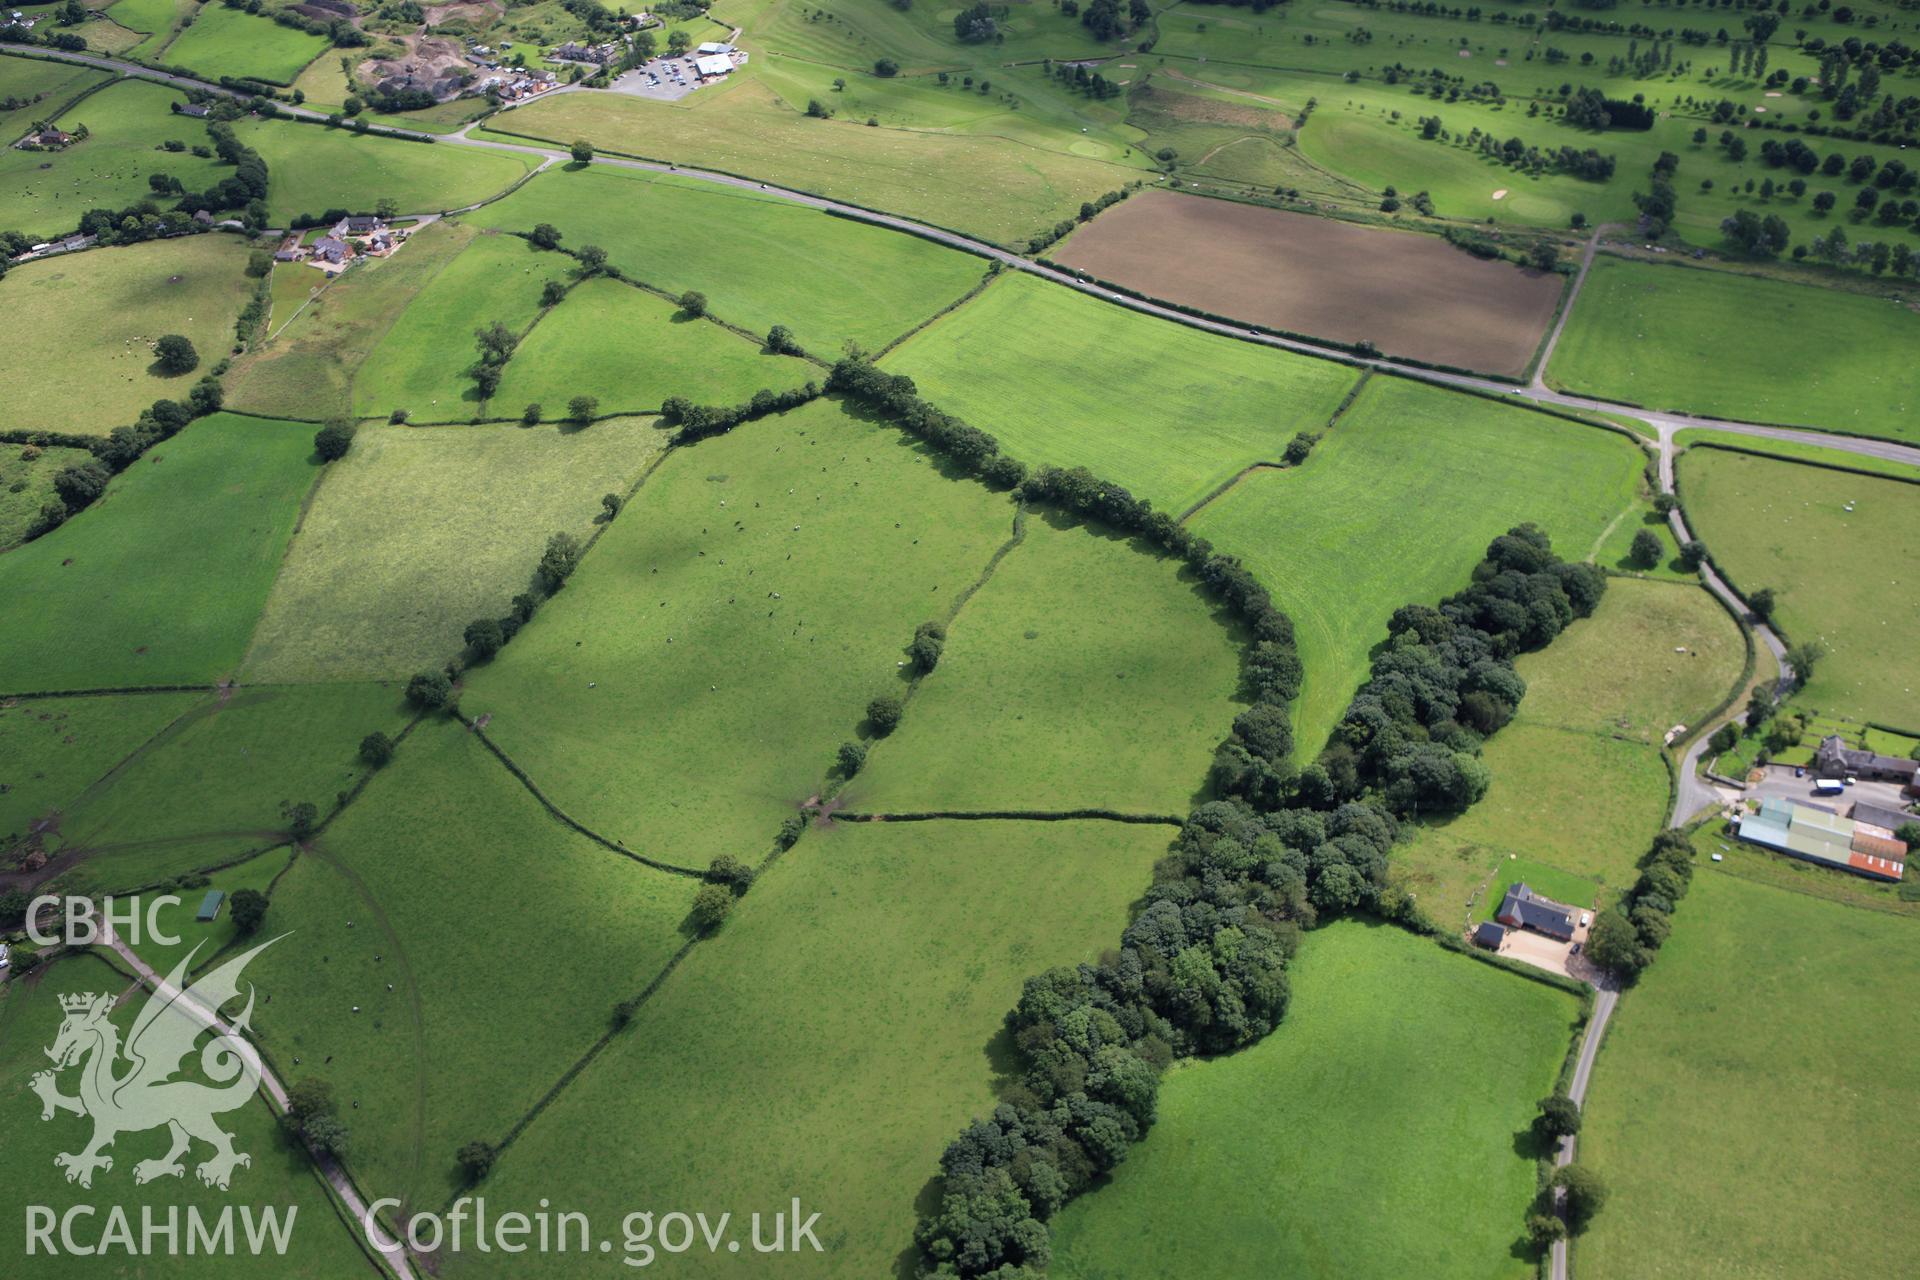 RCAHMW colour oblique aerial photograph of a section of Wat's Dyke from southeast of Whitehouse Farm to southwest of Garreg Llwyd. Taken on 30 July 2009 by Toby Driver